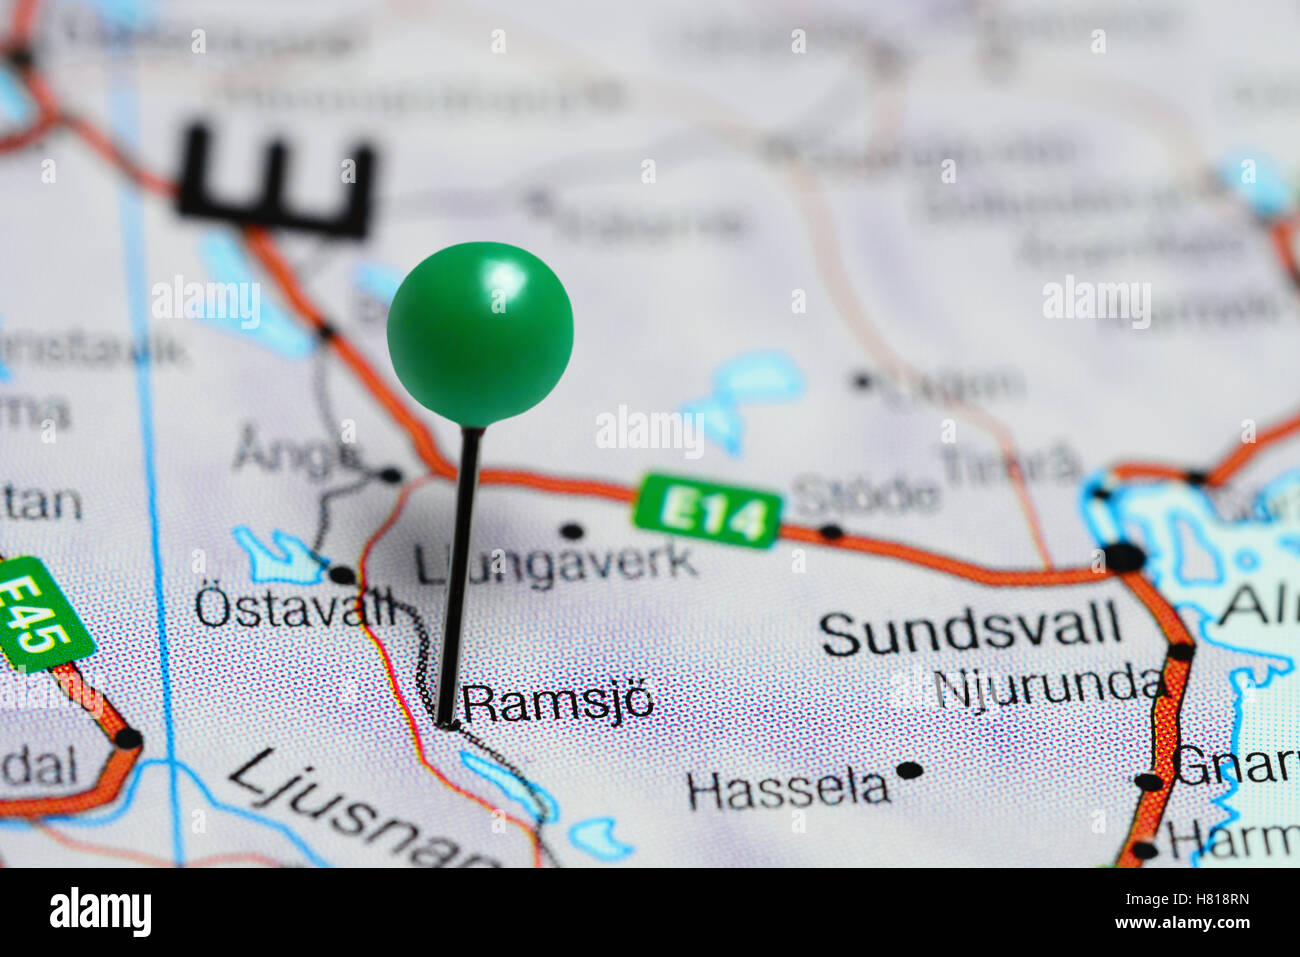 Ramsjo pinned on a map of Sweden Stock Photo